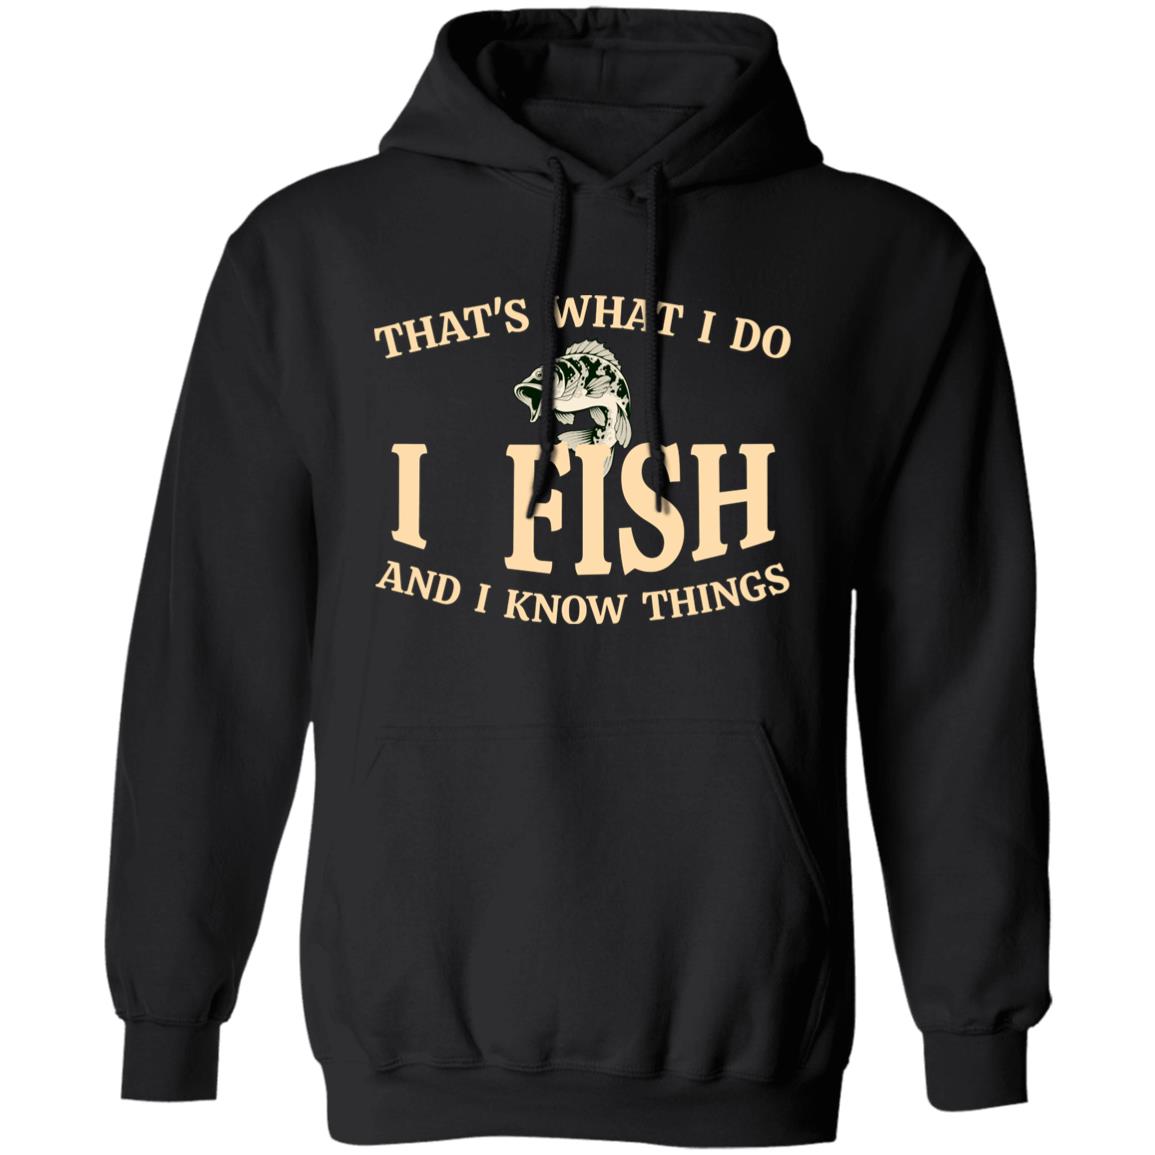 That's what I do I fish and I know things hoodie black